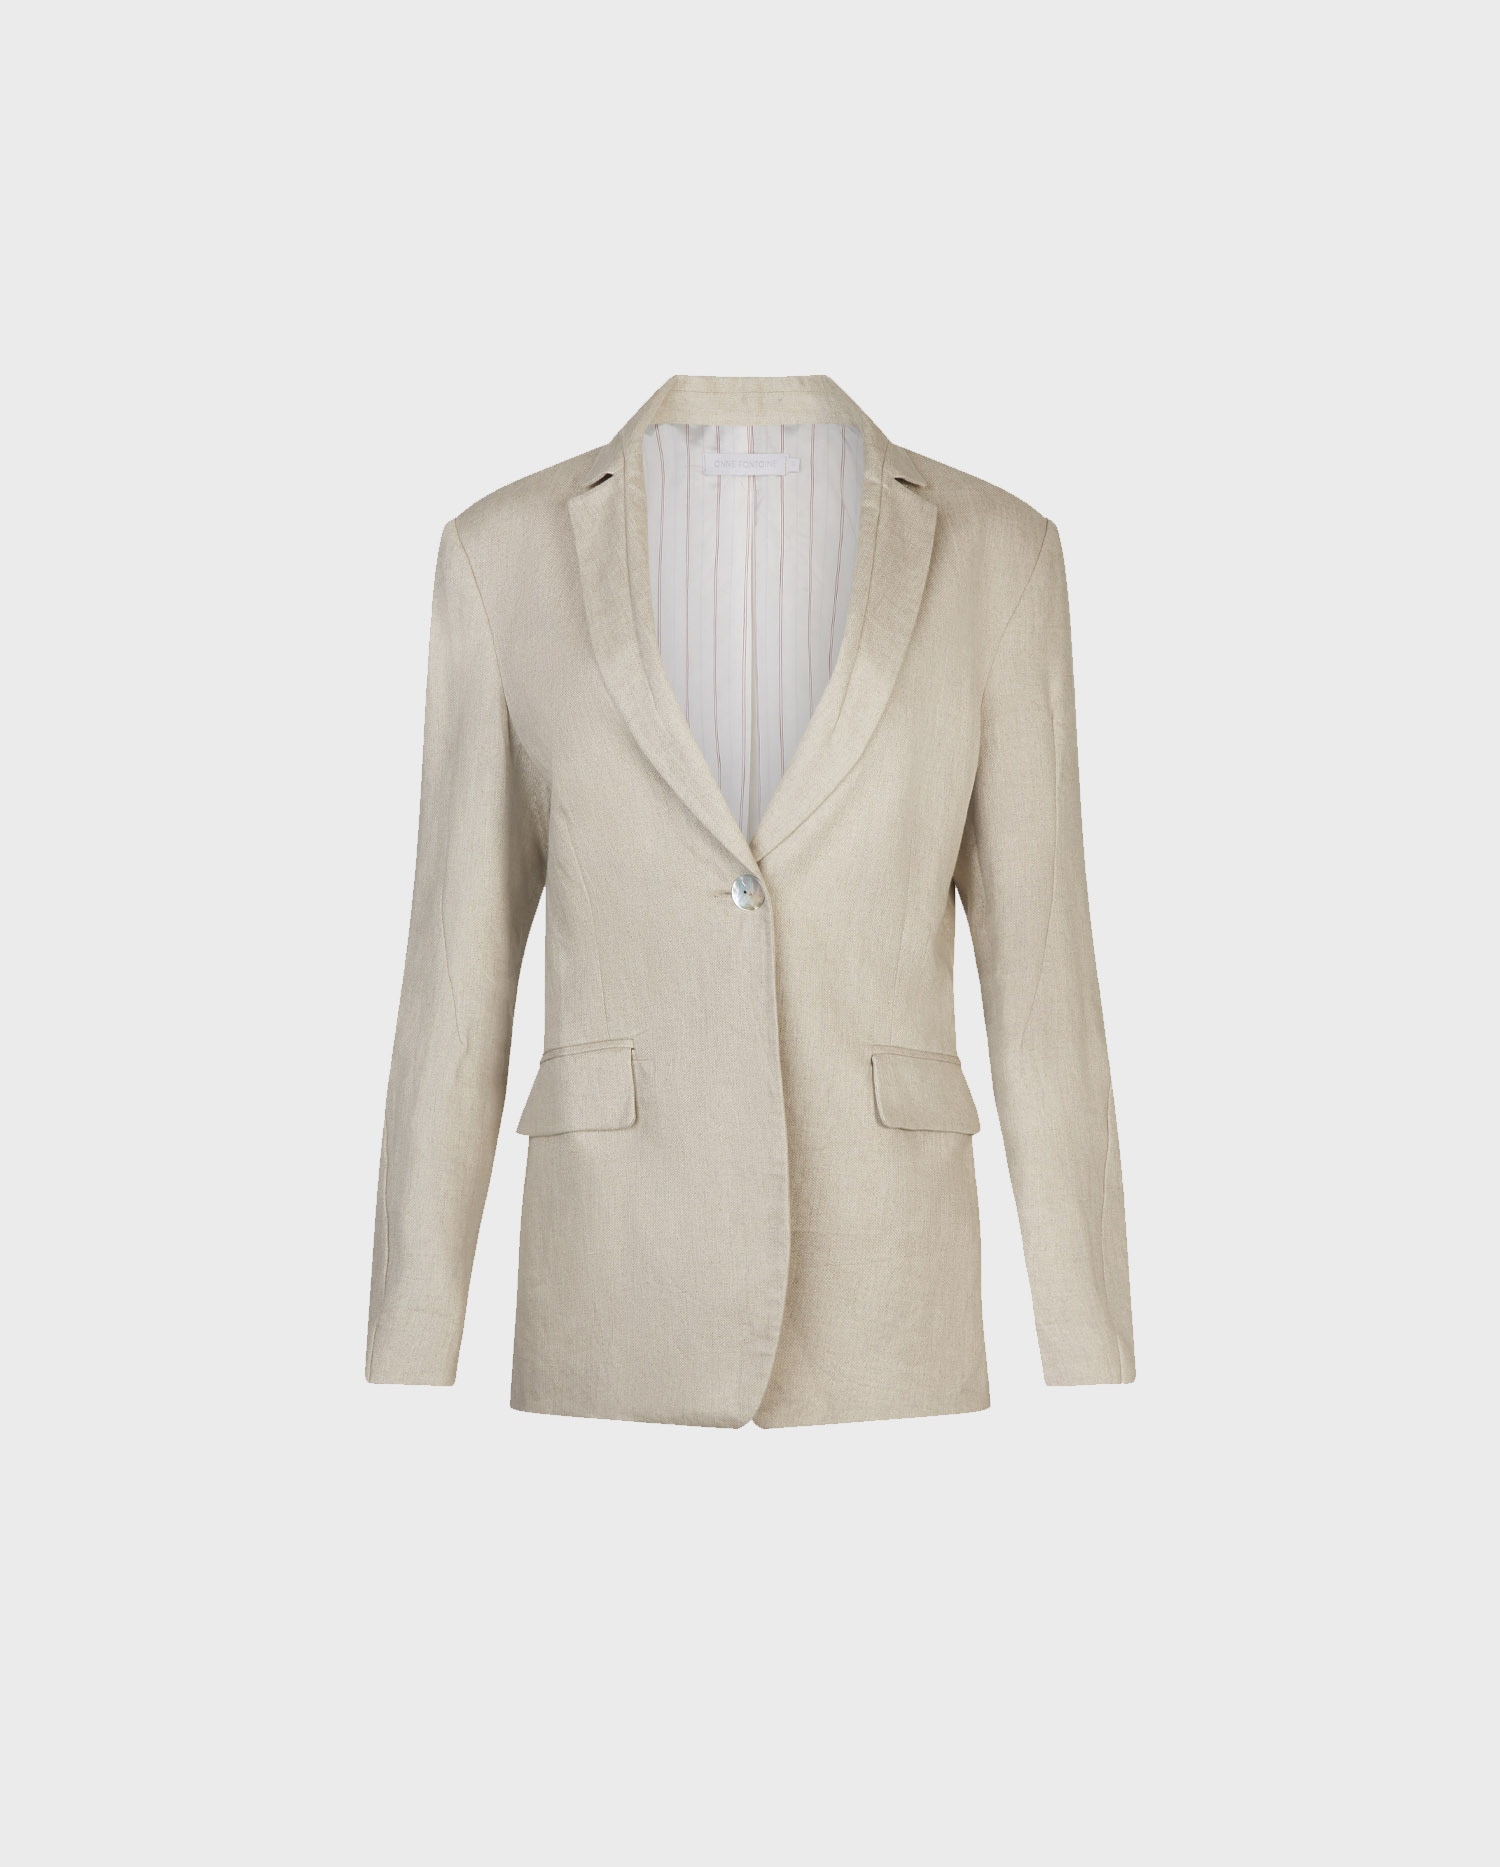 ELLANDE Long sleeve oversize boyfriend blazer in natural linen and single closure mother of pearl button and flap pockets